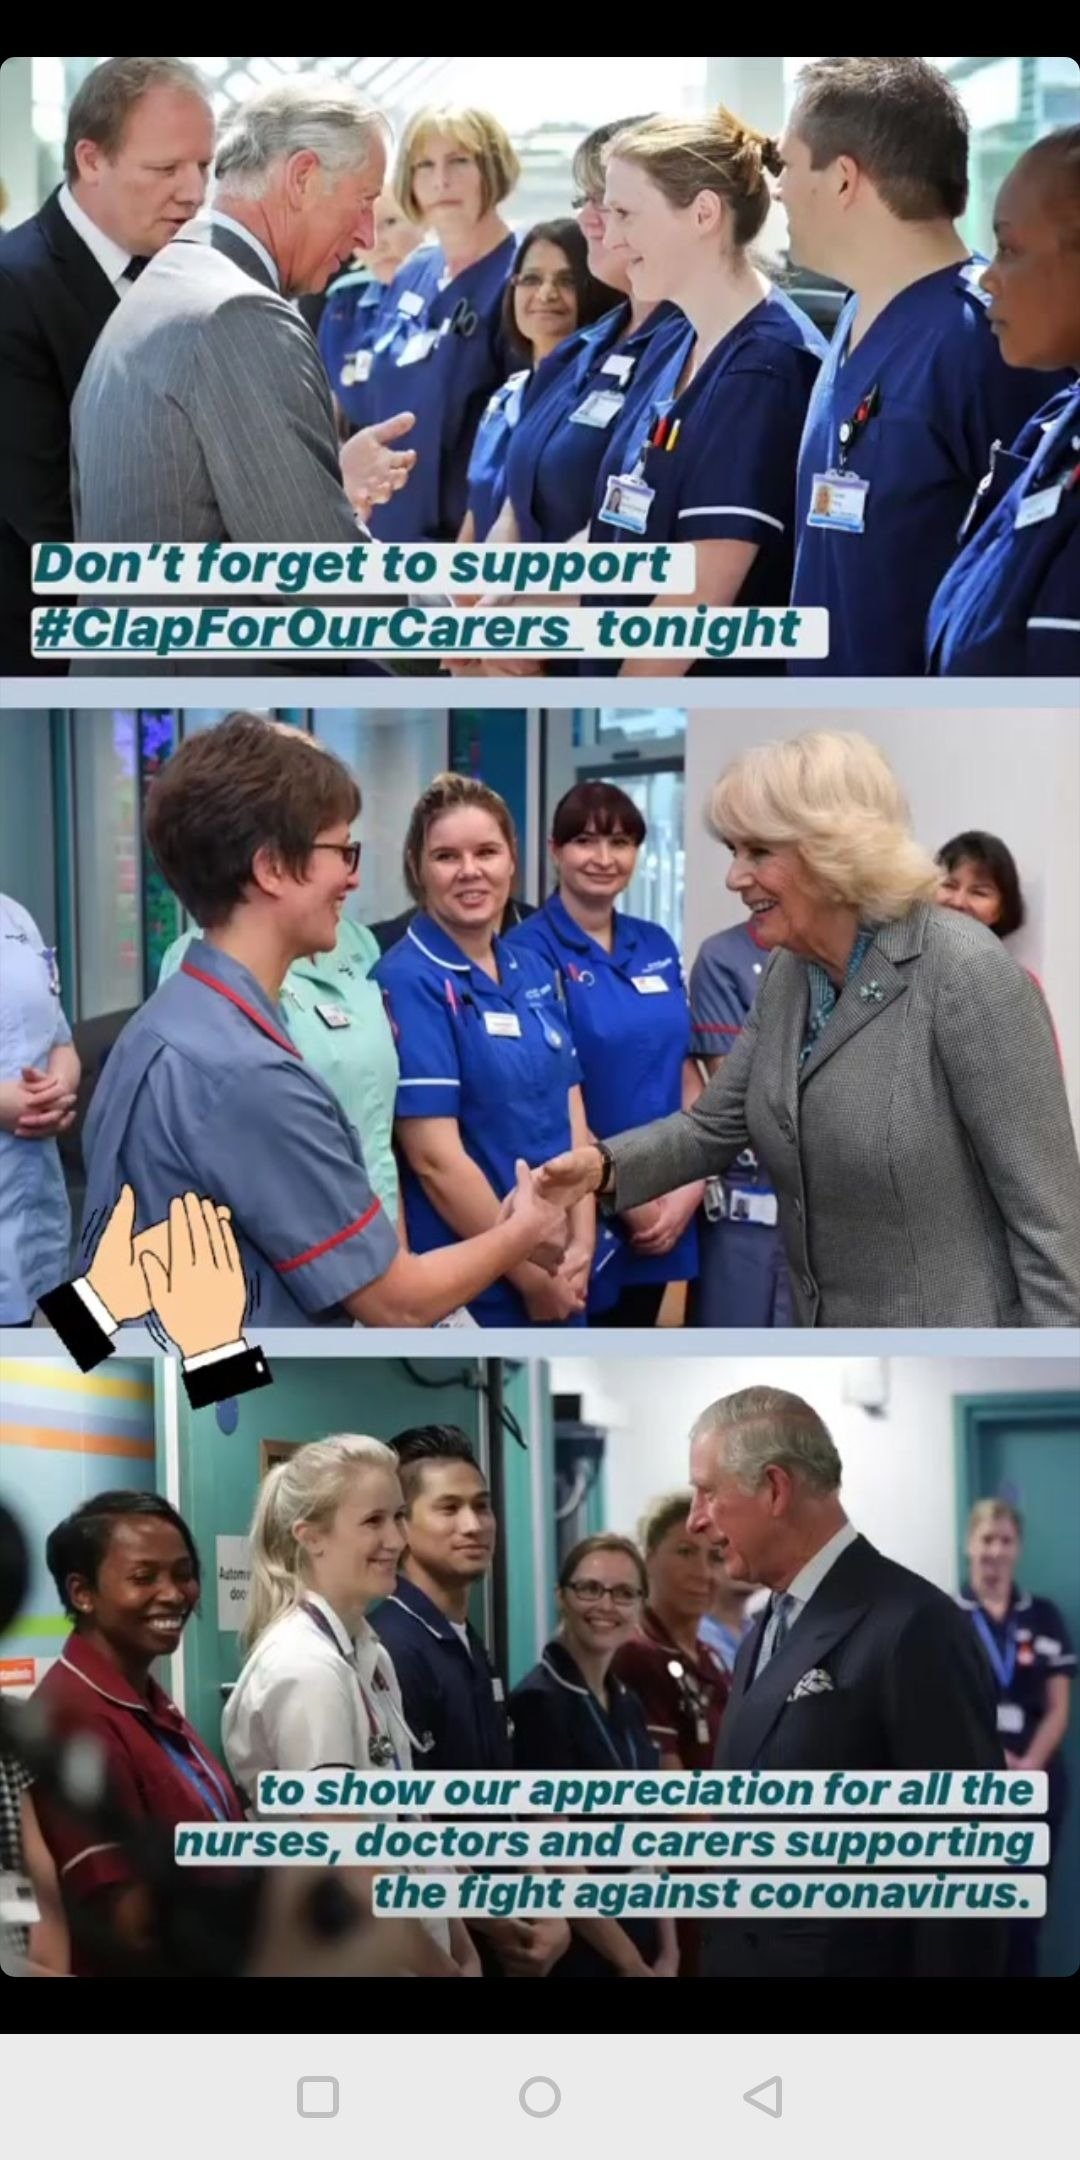 Prince Charles and Duchess Camilla meeting medical staff, images shared on March 26, 2020 | Photo: Instagram Story/clarencehouse